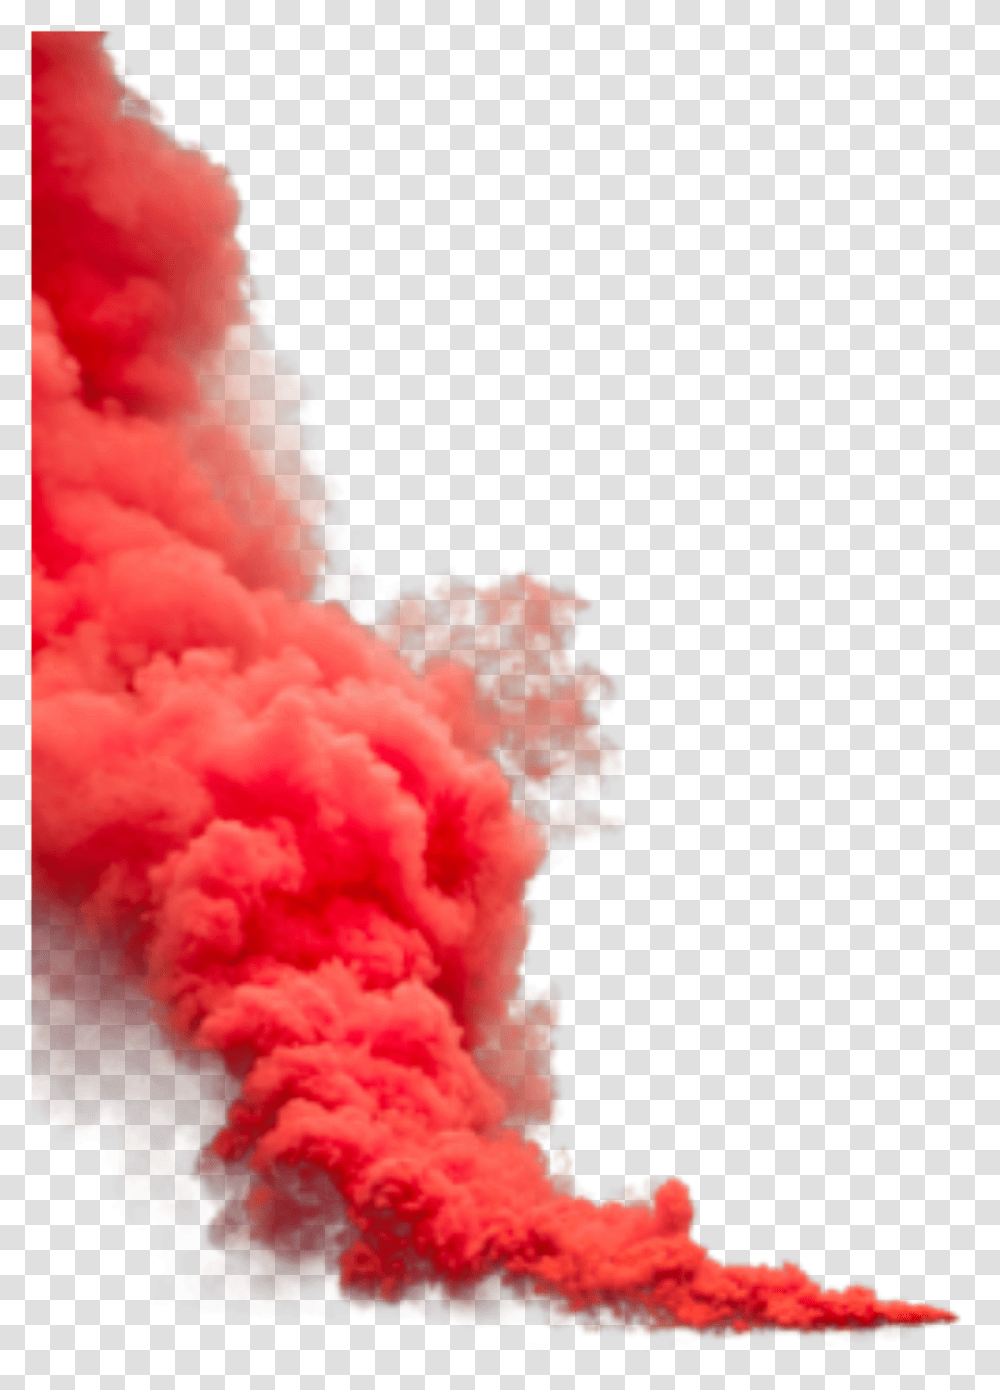 Best Smoke Bomb Editing In Picsart Viral Complete Image, Nature, Outdoors, Mountain, Volcano Transparent Png